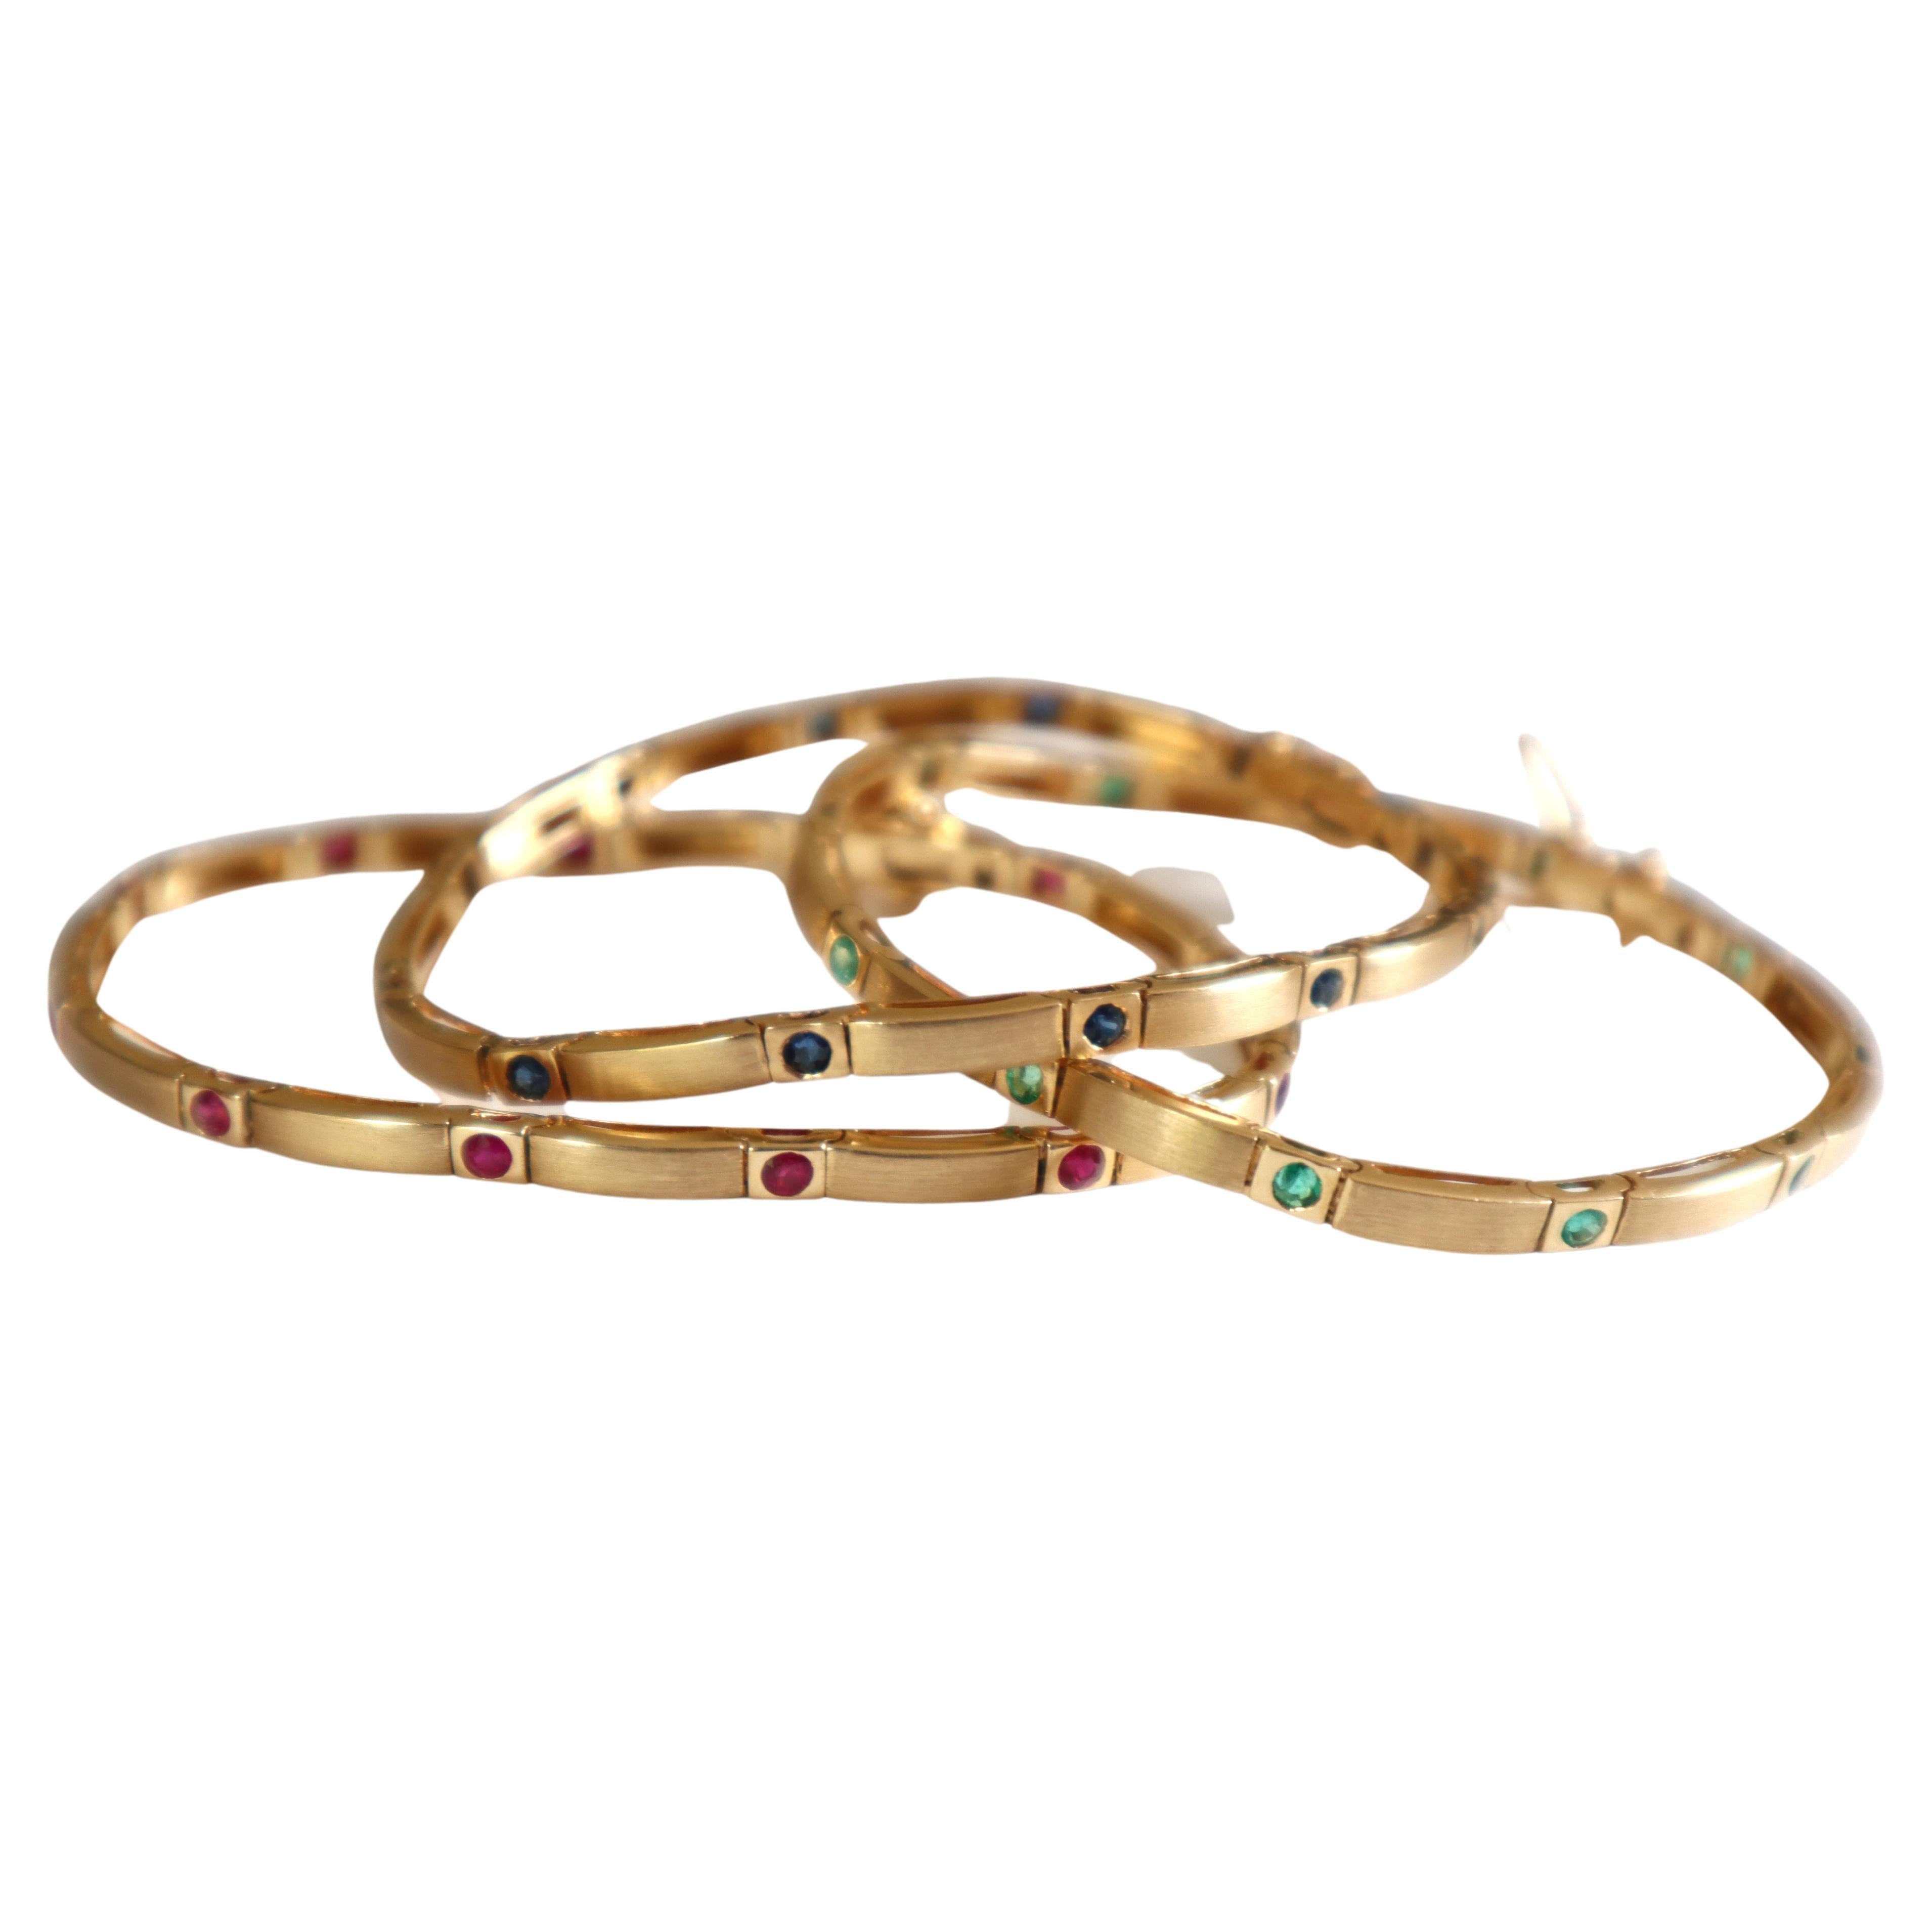 Set of 3 Bracelets in 18 Kt Yellow Satin Gold, Rubies, Emeralds, Sapphires  For Sale at 1stDibs